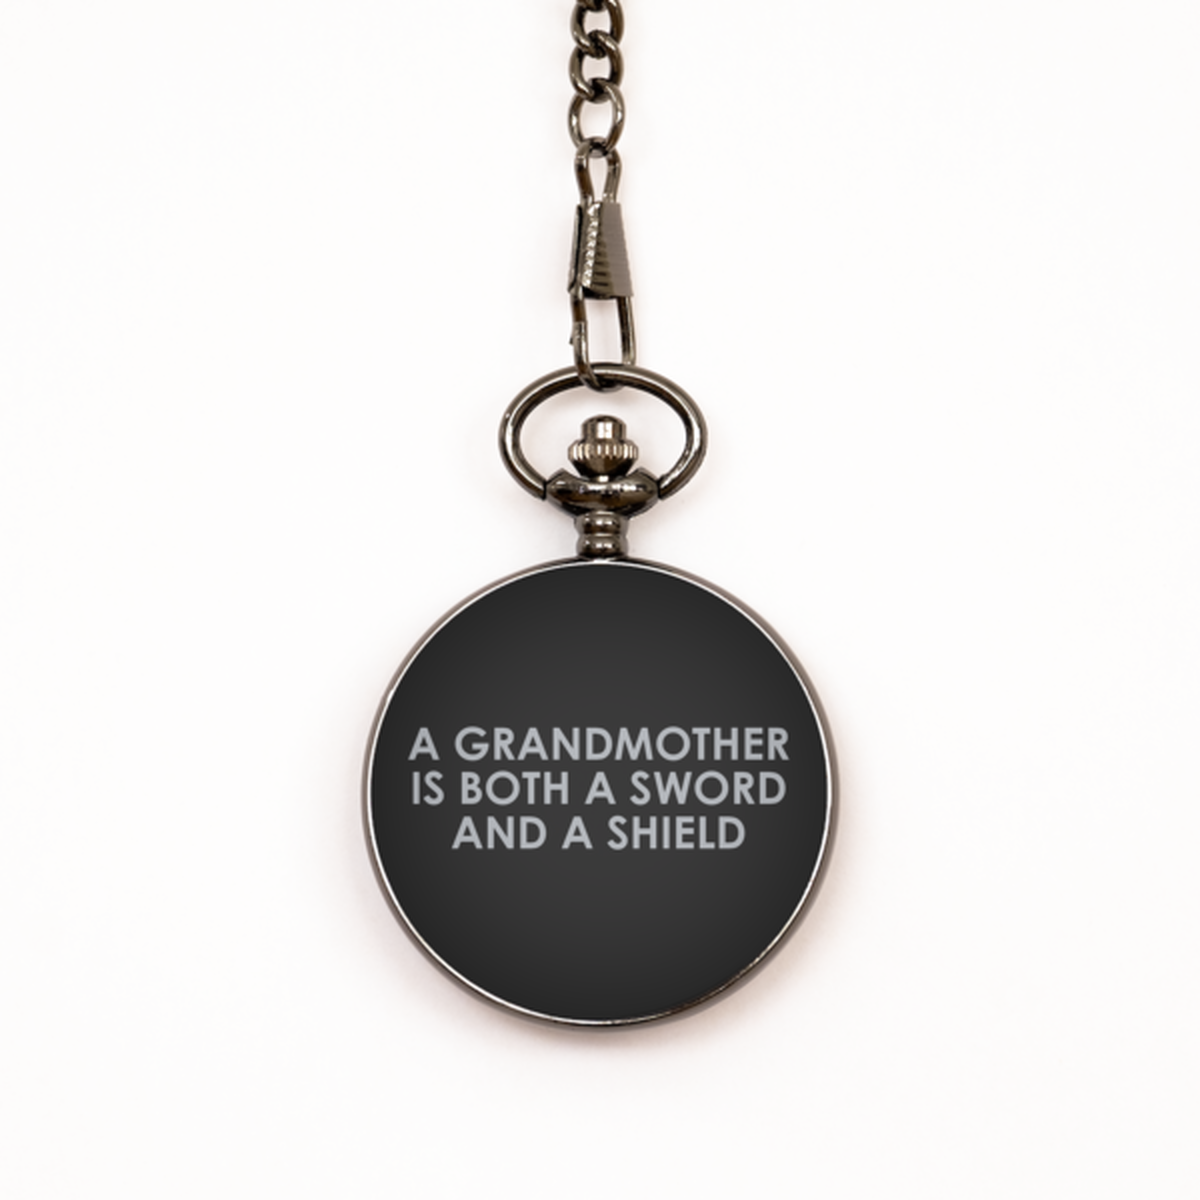 To My Grandma Black Pocket Watch, Sword And A Shield, Mothers Day Gifts For Grandma From Granddaughter, Birthday Gifts For Women